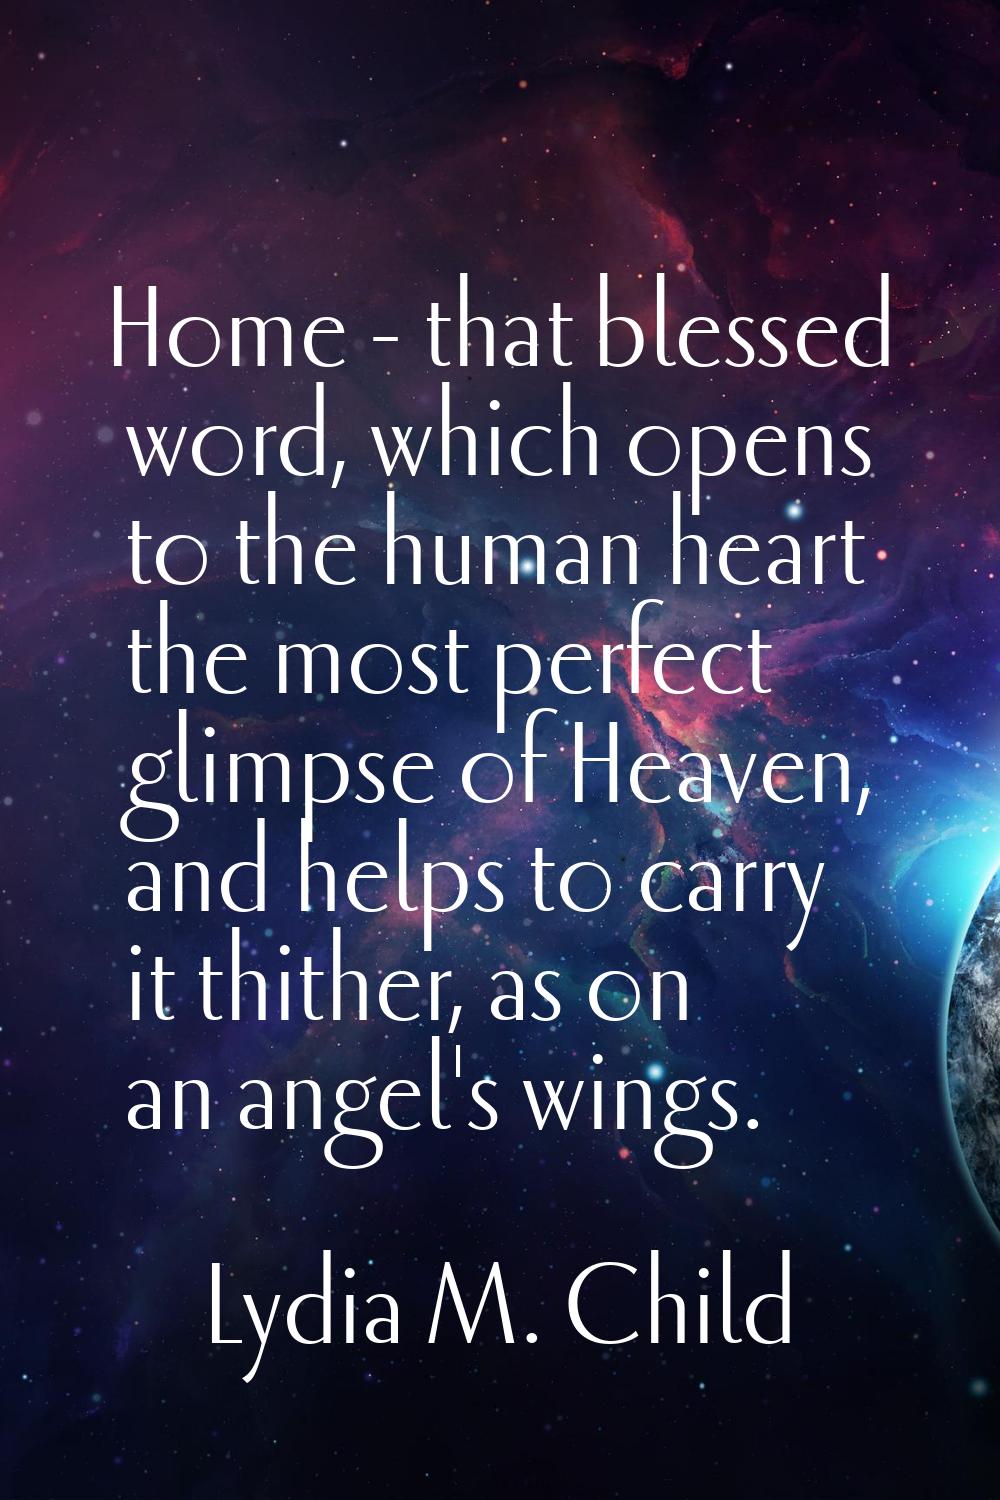 Home - that blessed word, which opens to the human heart the most perfect glimpse of Heaven, and he